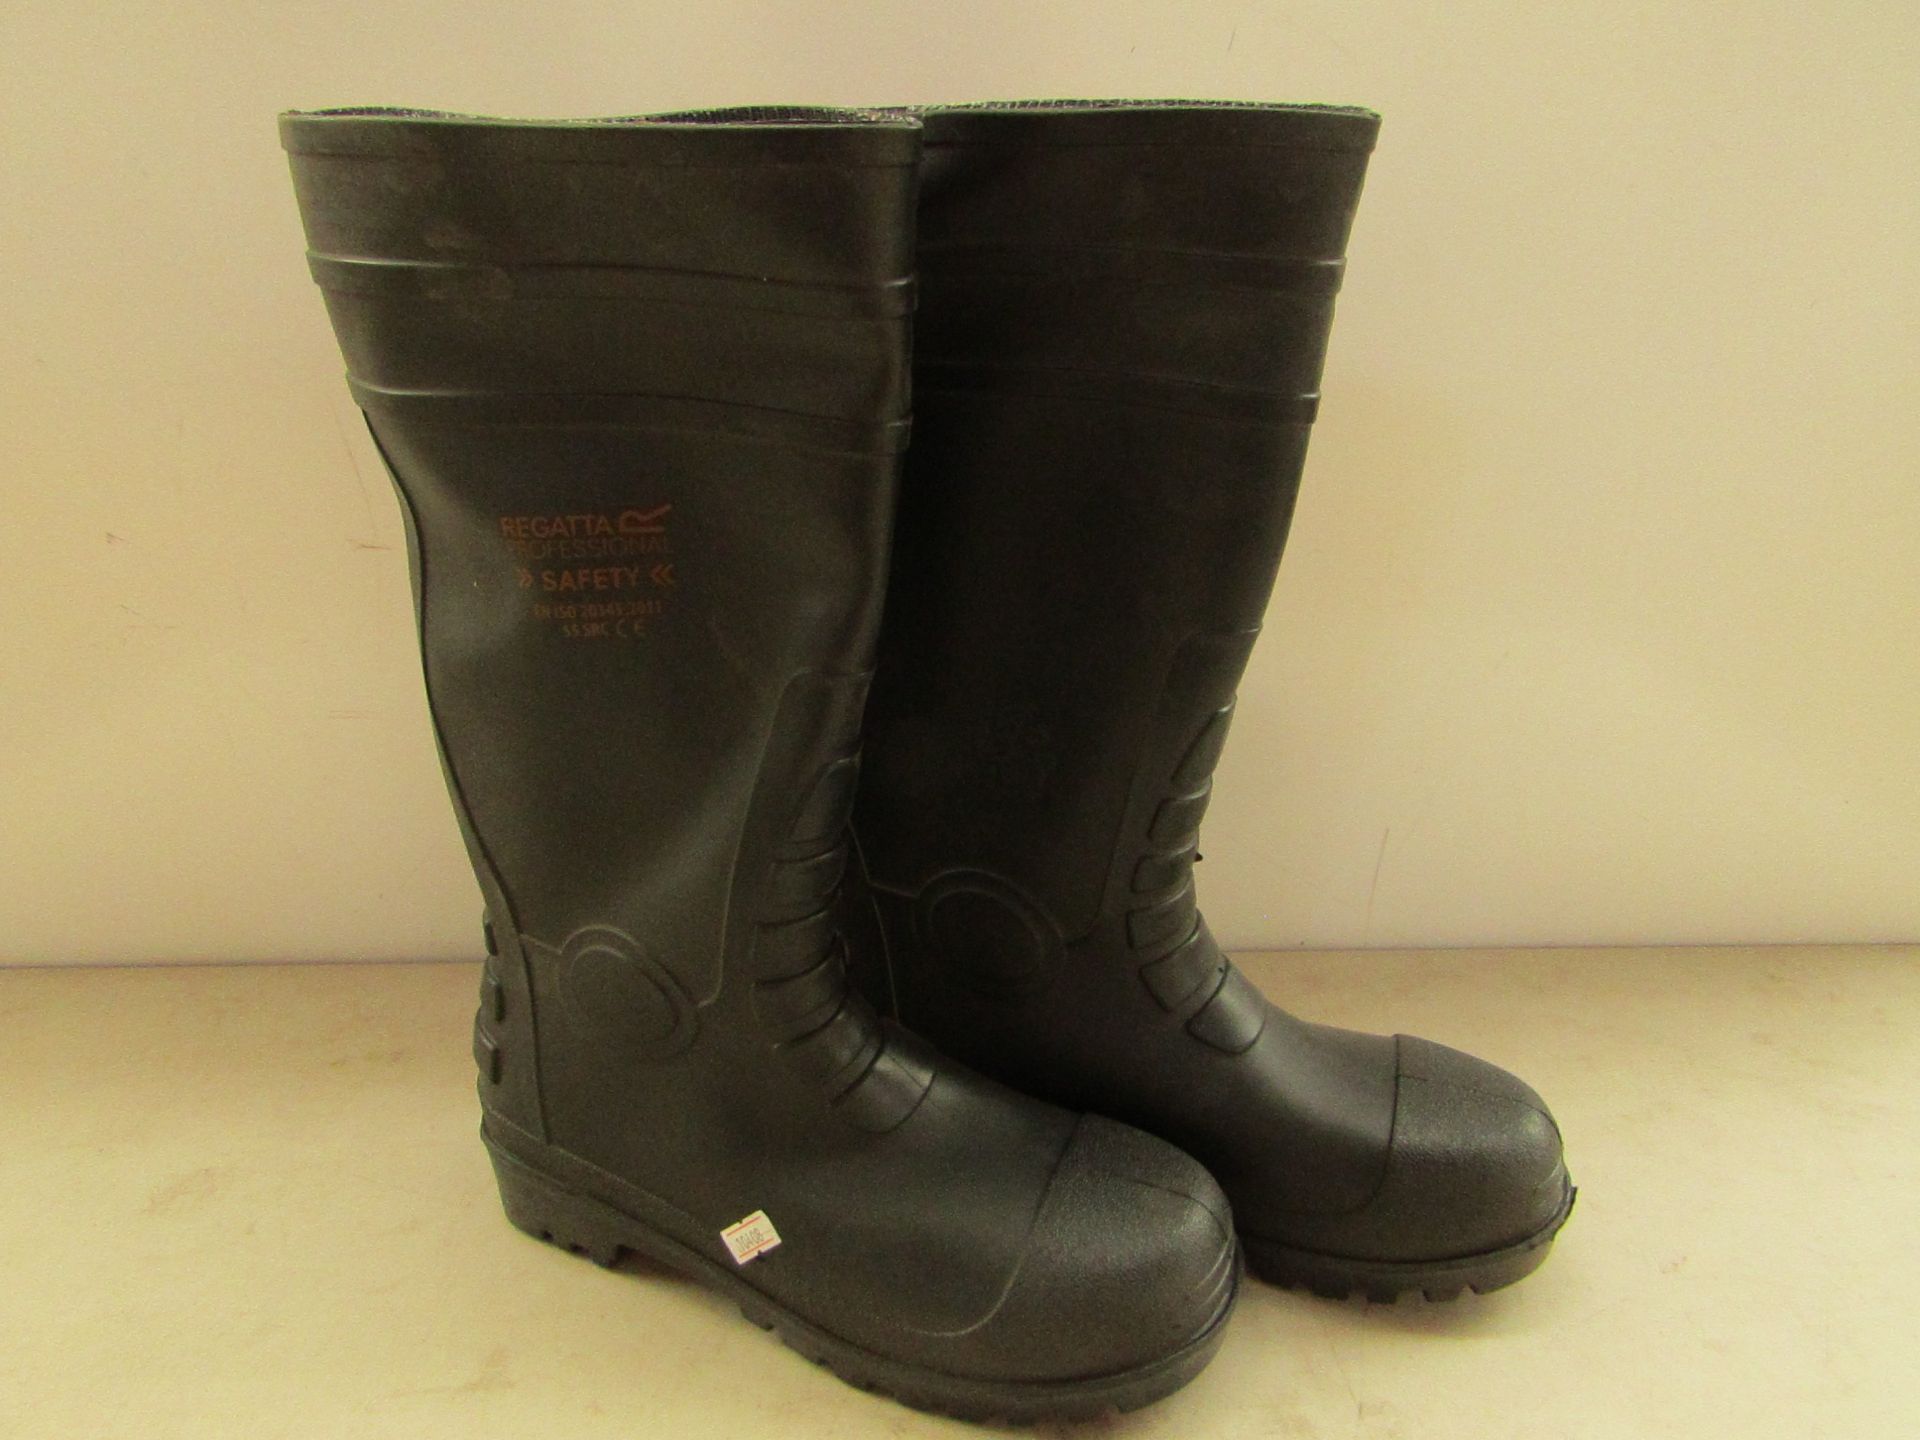 Regatta Professional Douglas steel toe cap safety wellingtons, size UK8, new and packaged.